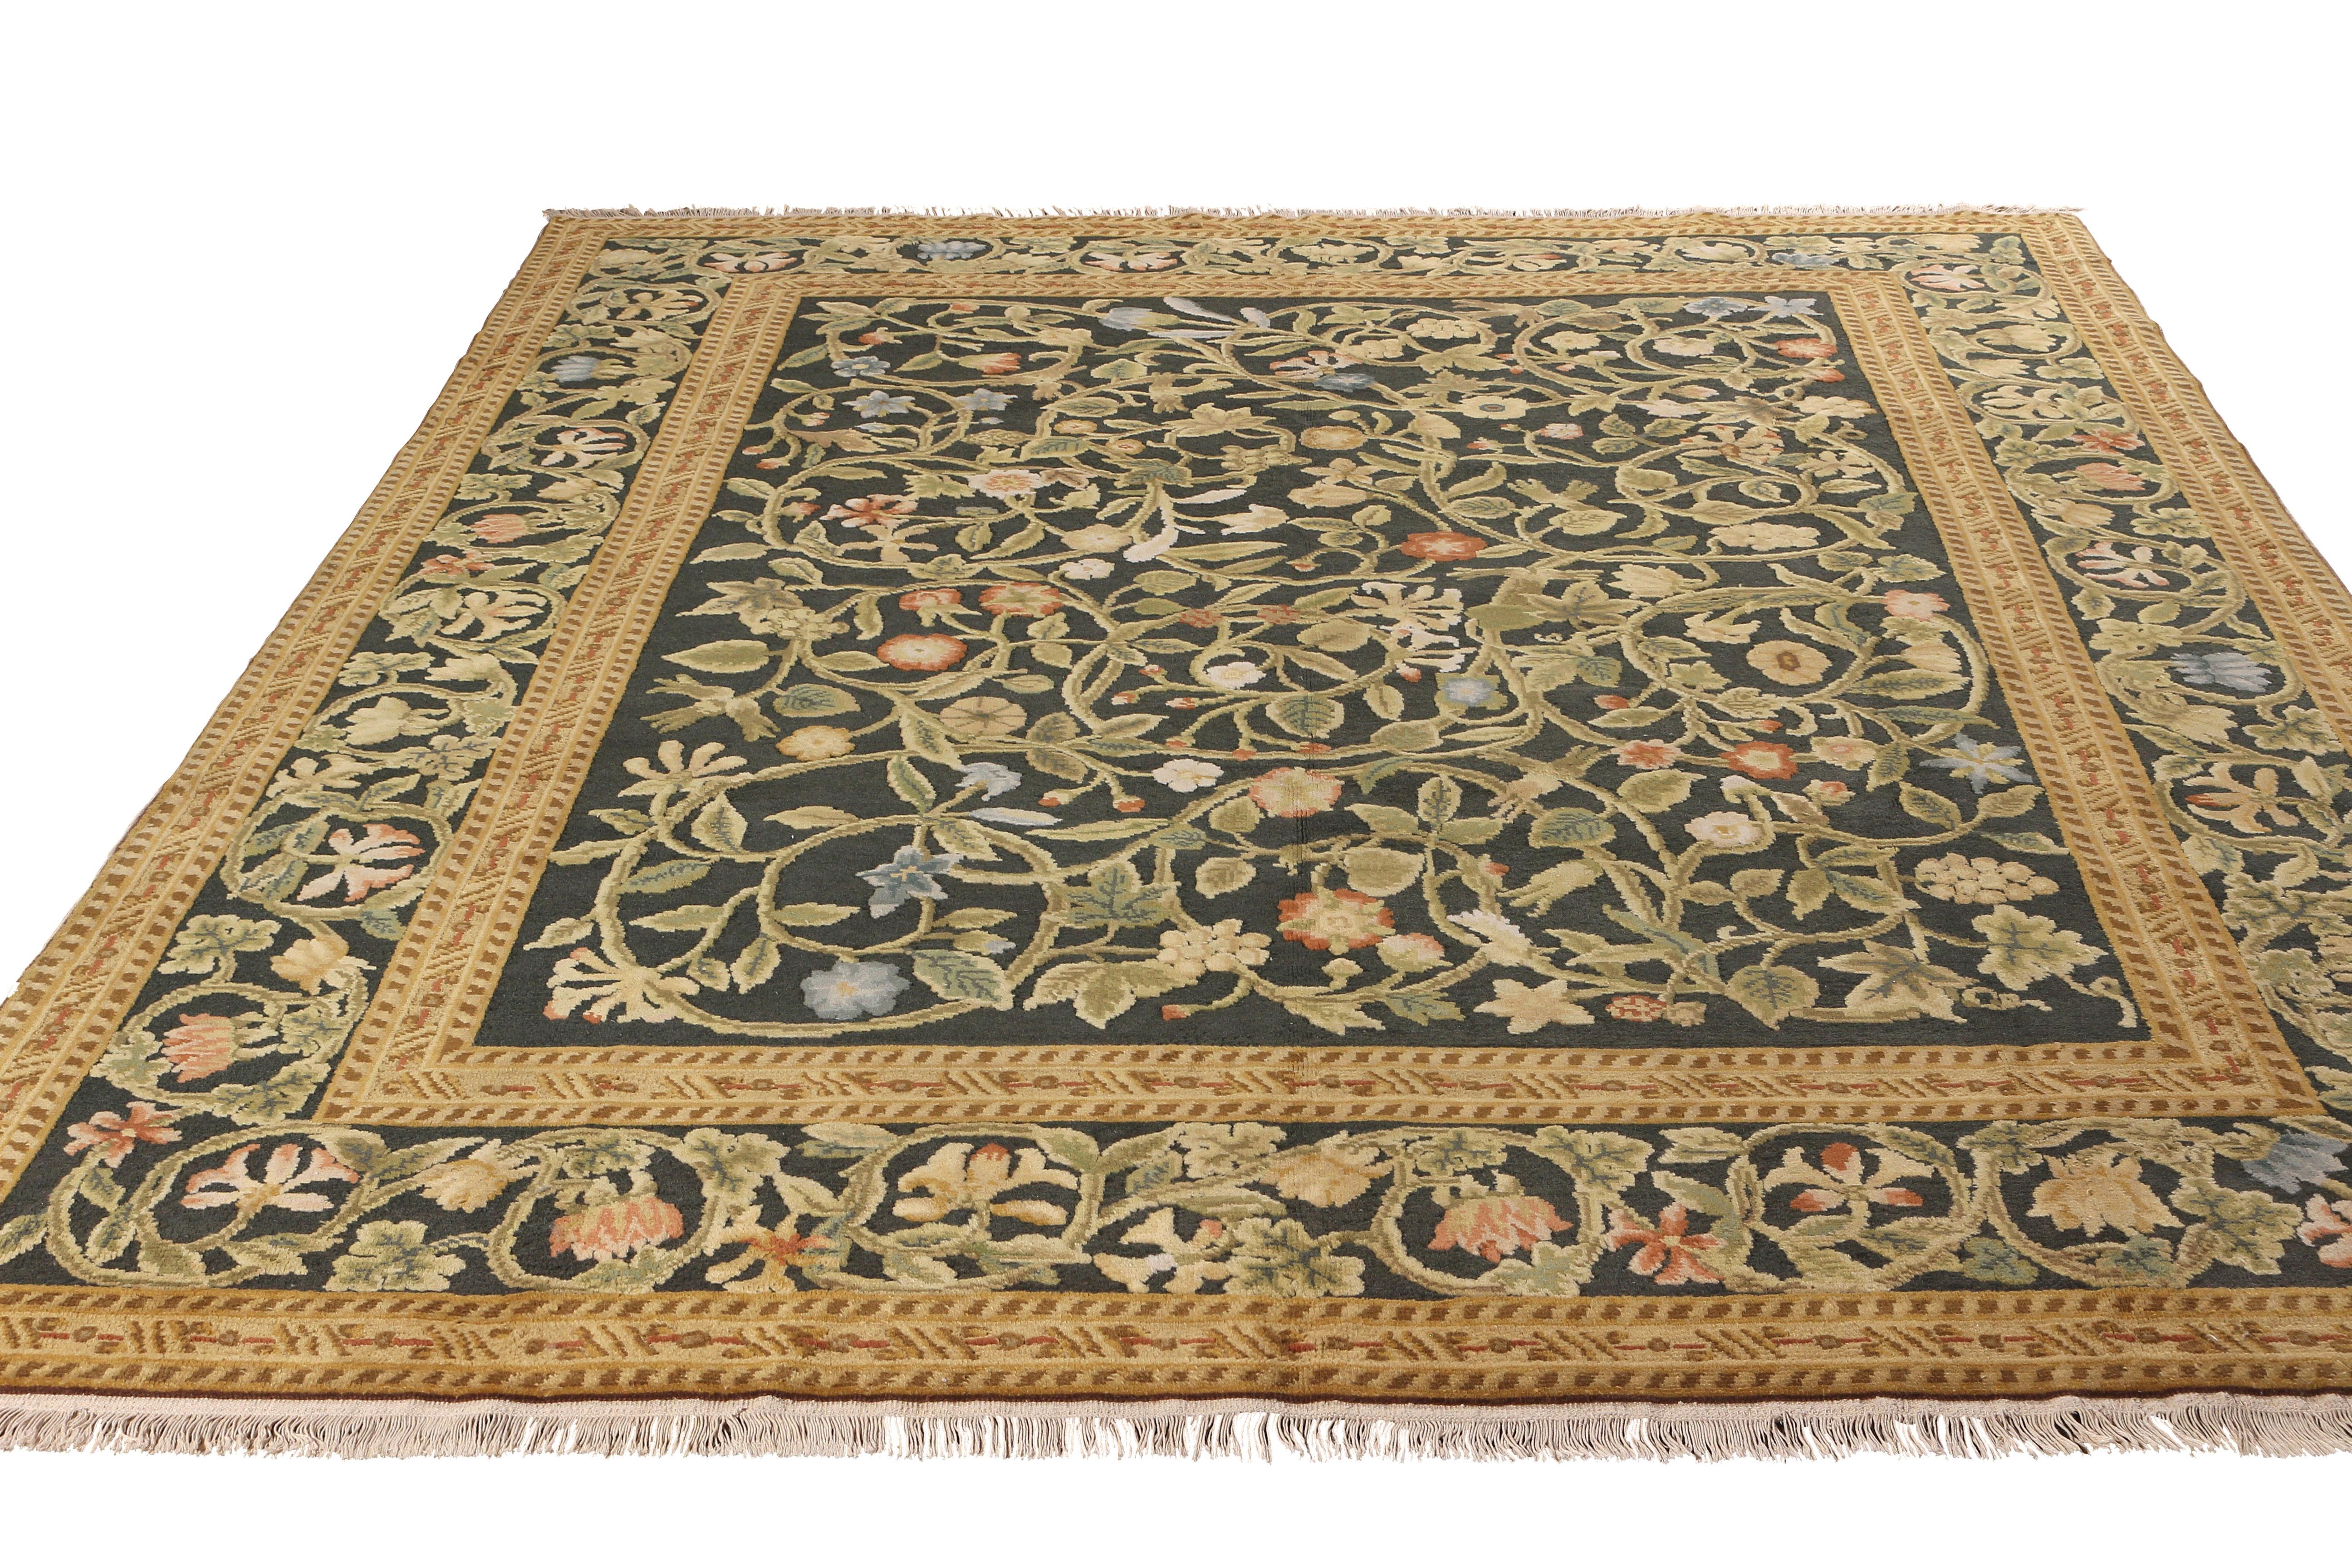 Hand knotted in a quality wool, this addition to the European rug collection by Rug & Kilim draws influence from the 18th century Tudor rug style, an exemplary piece reimagined in high-and-low pile recapturing a kingly floral pattern in